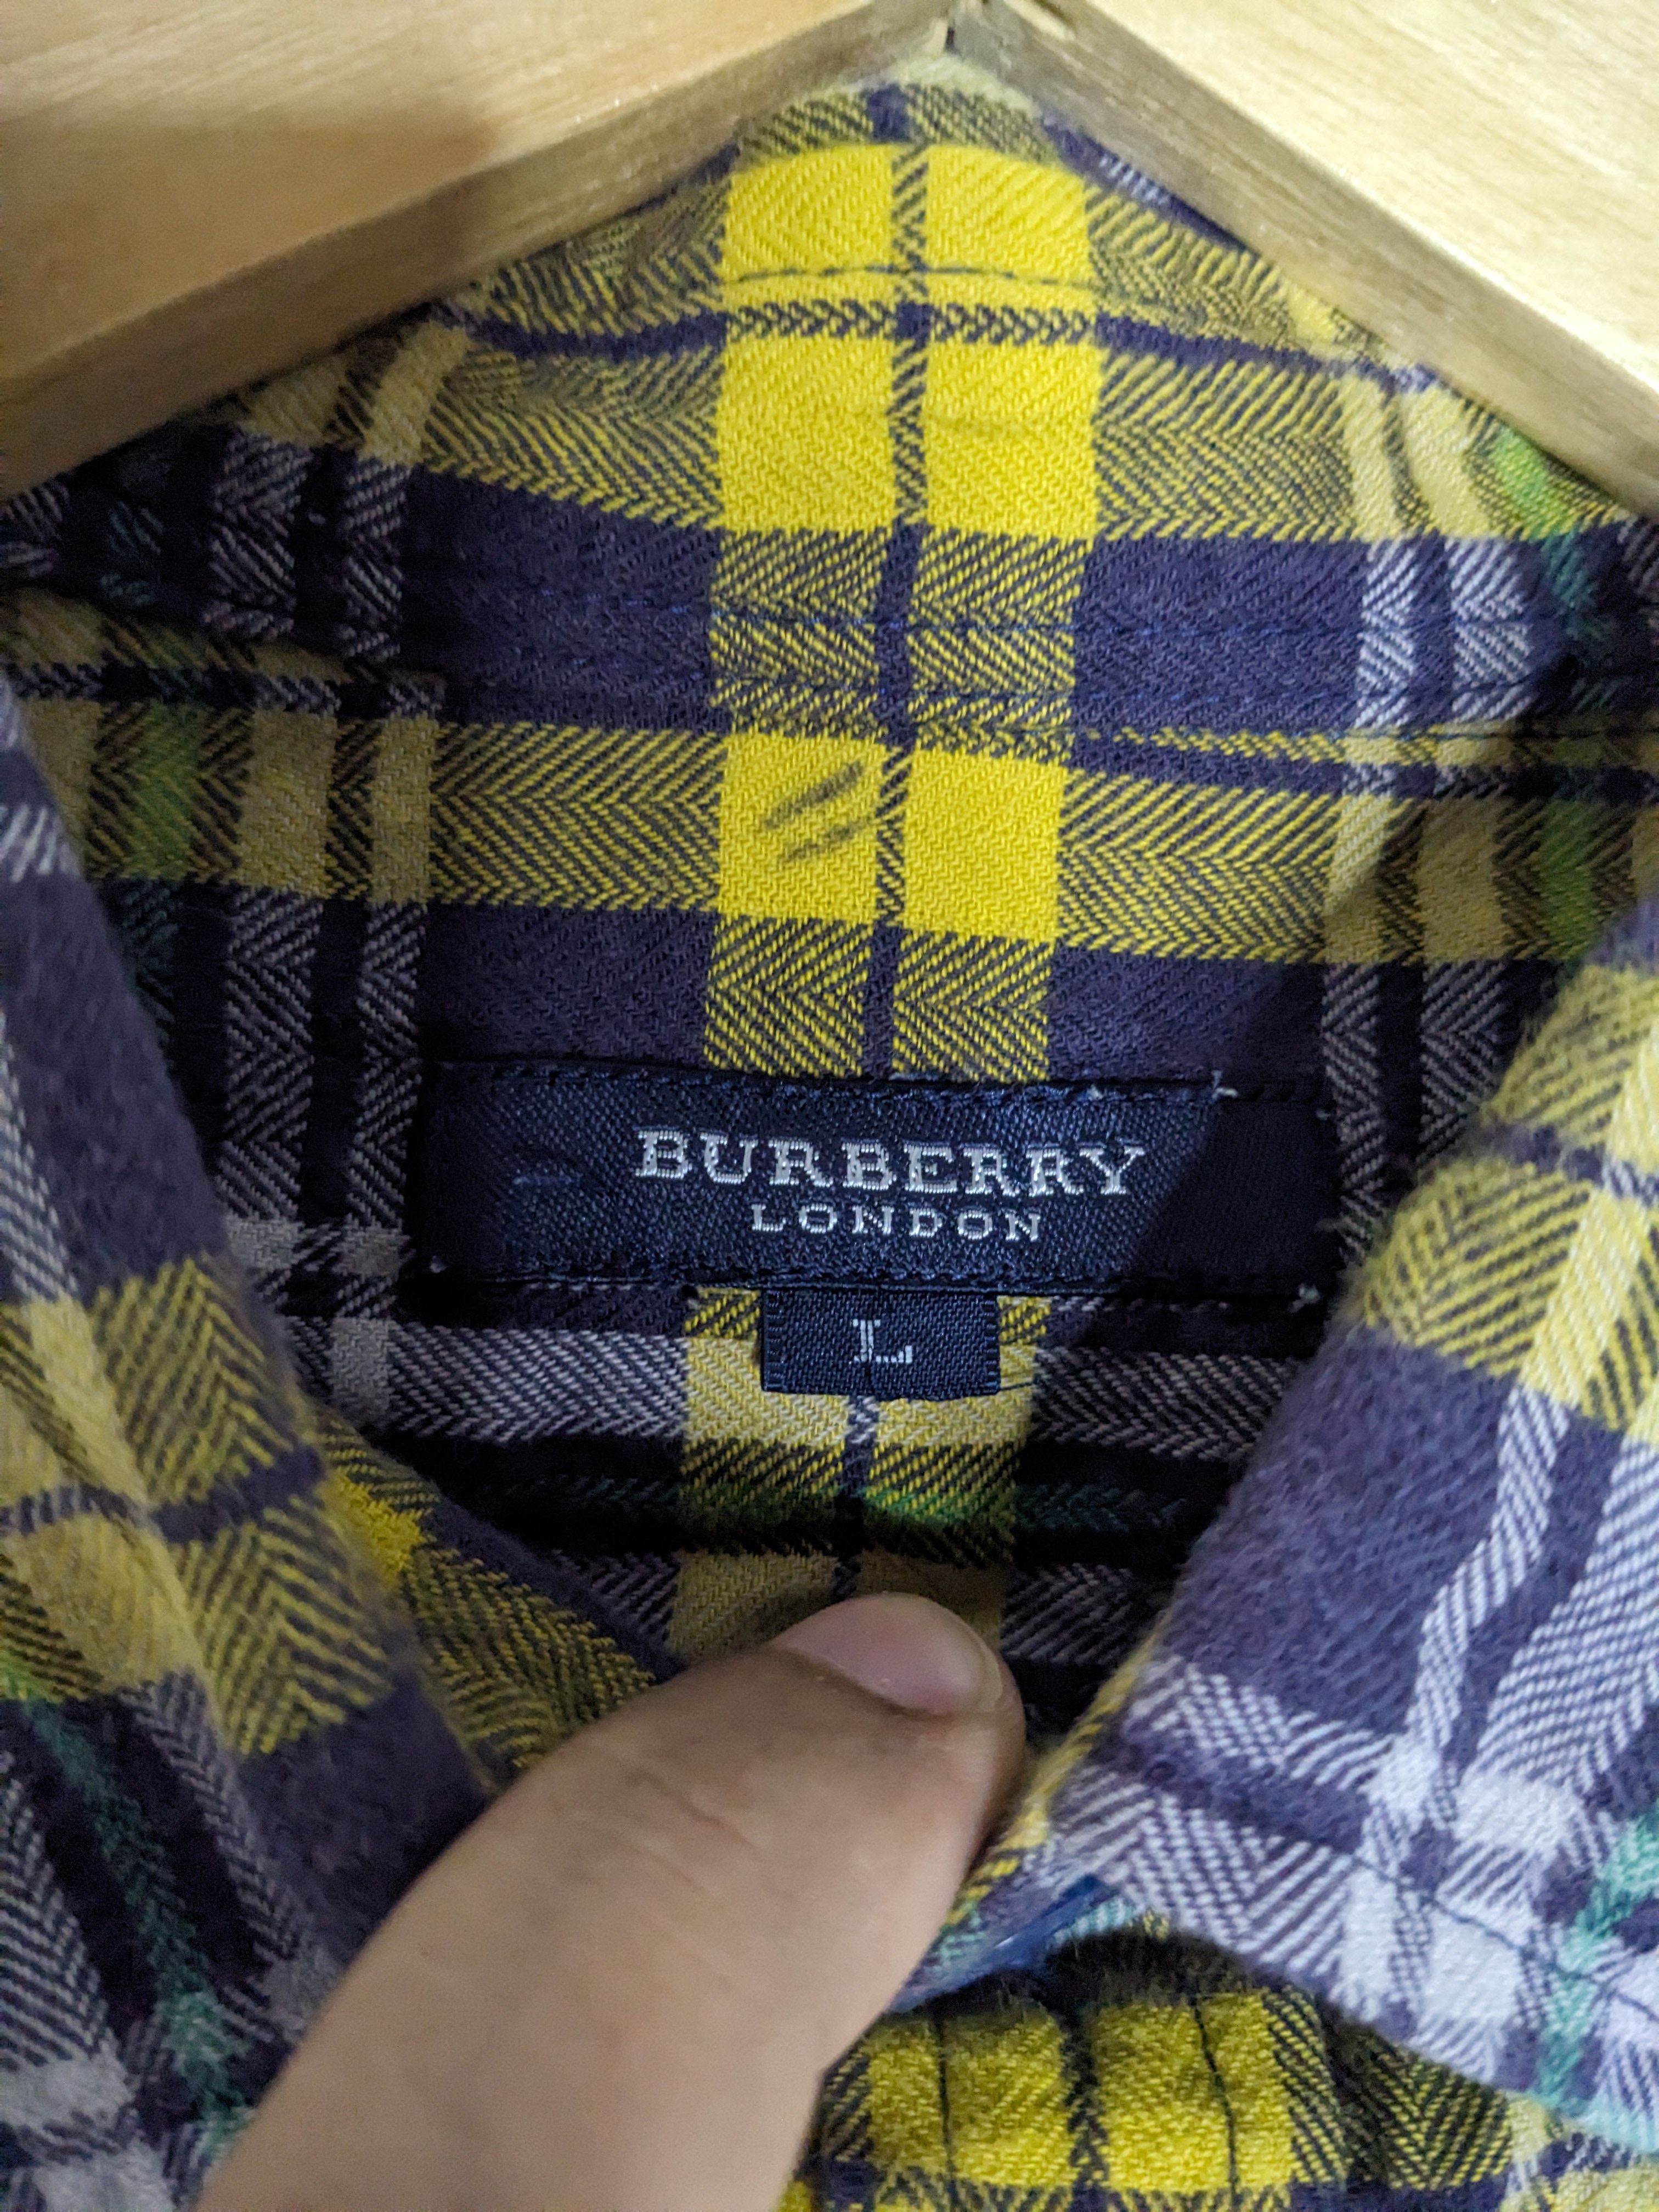 Burberry London Wrinkle Style Checked Plaid Flannel Shirt - 7